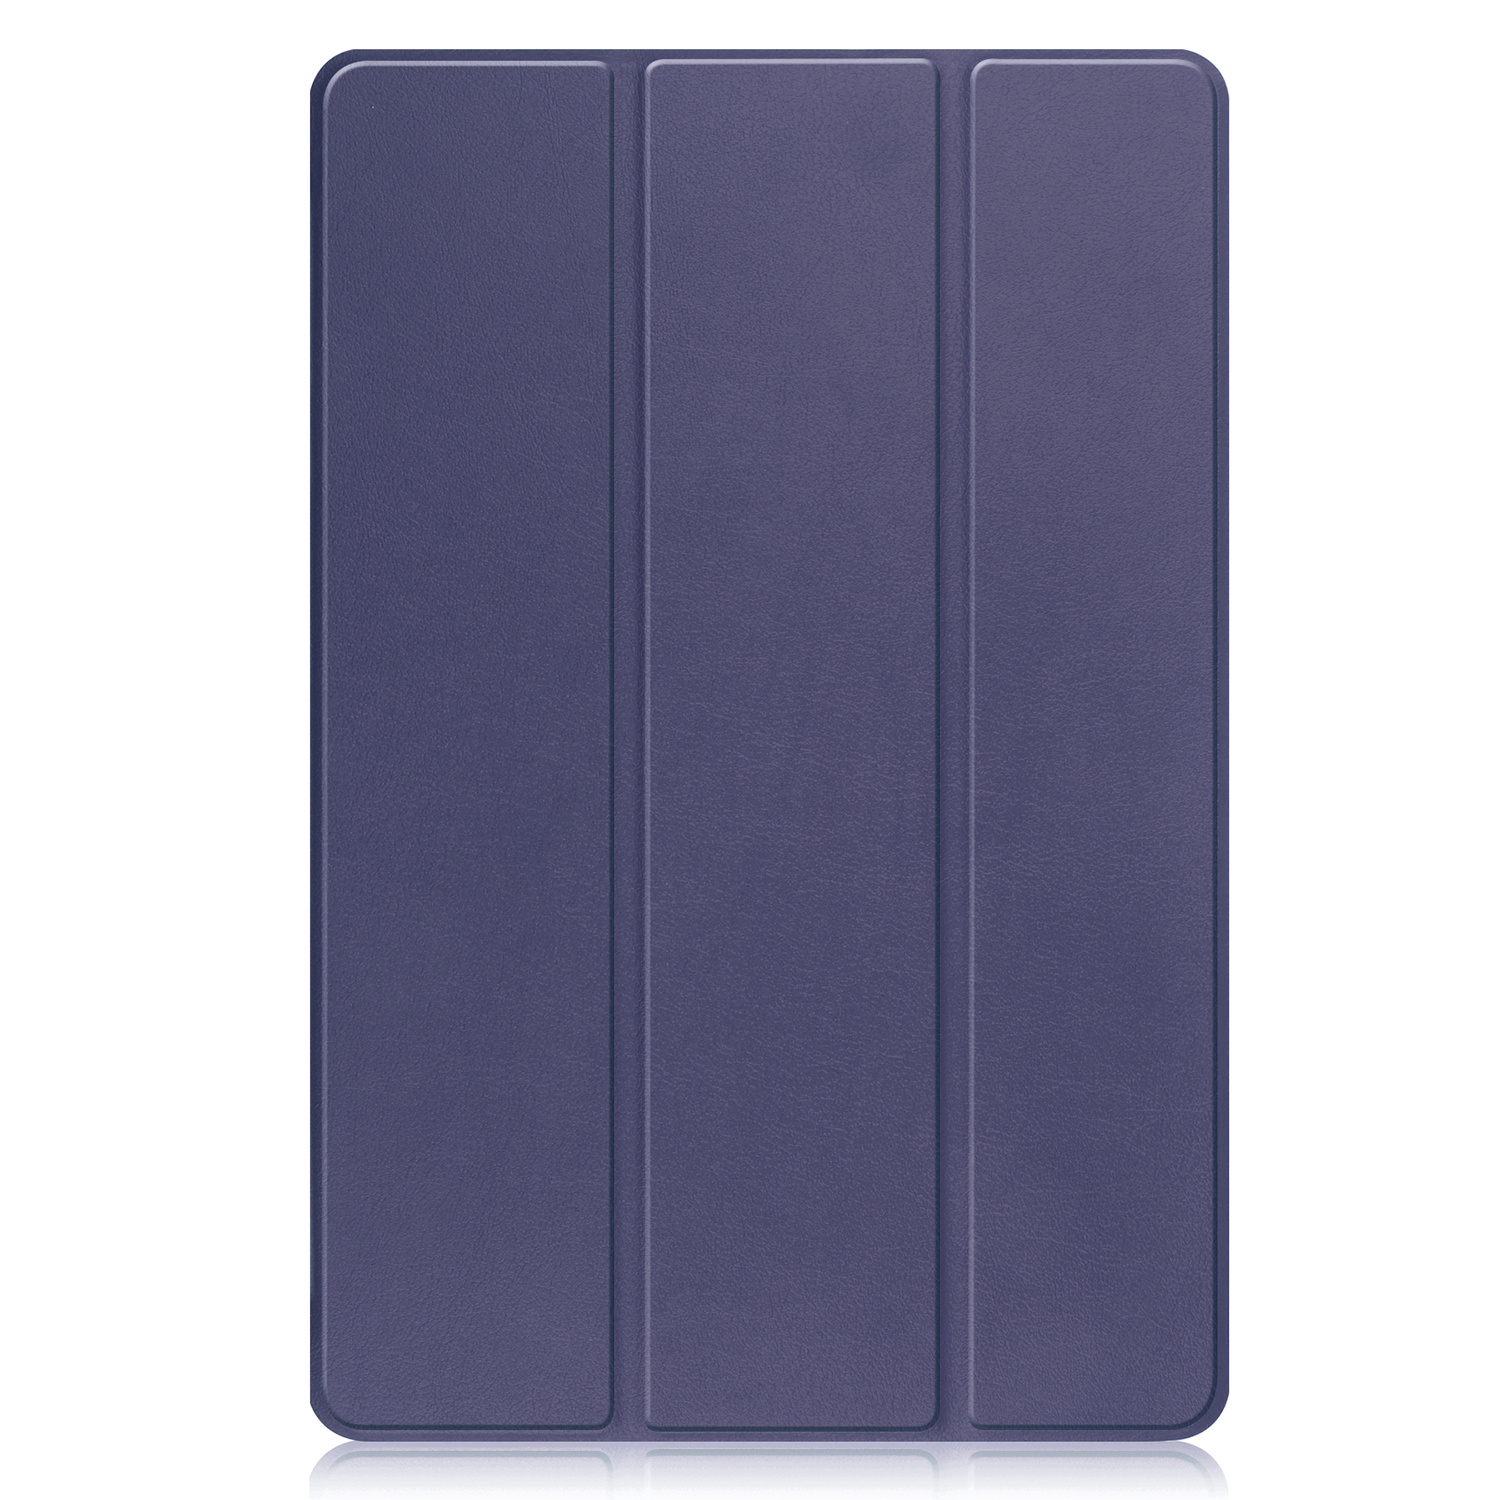 Nomfy Hoes Geschikt voor Lenovo Tab P11 Pro Hoes Tri-fold Tablet Hoesje Case Met Uitsparing Geschikt voor Lenovo Pen - Hoesje Geschikt voor Lenovo Tab P11 Pro Hoesje Hardcover Bookcase - Donkerblauw